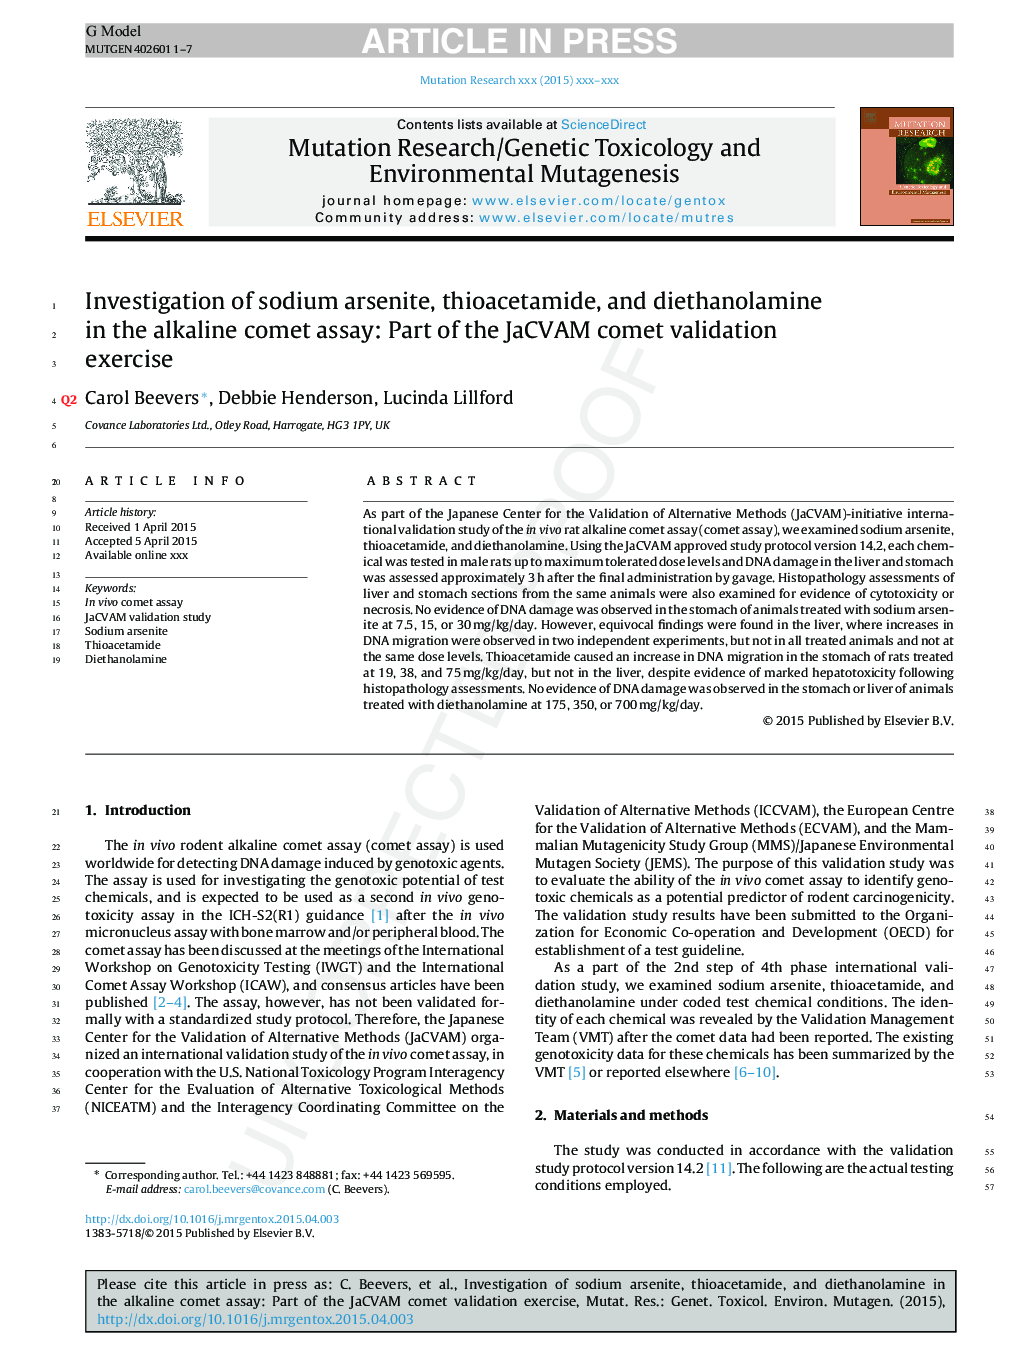 Investigation of sodium arsenite, thioacetamide, and diethanolamine in the alkaline comet assay: Part of the JaCVAM comet validation exercise